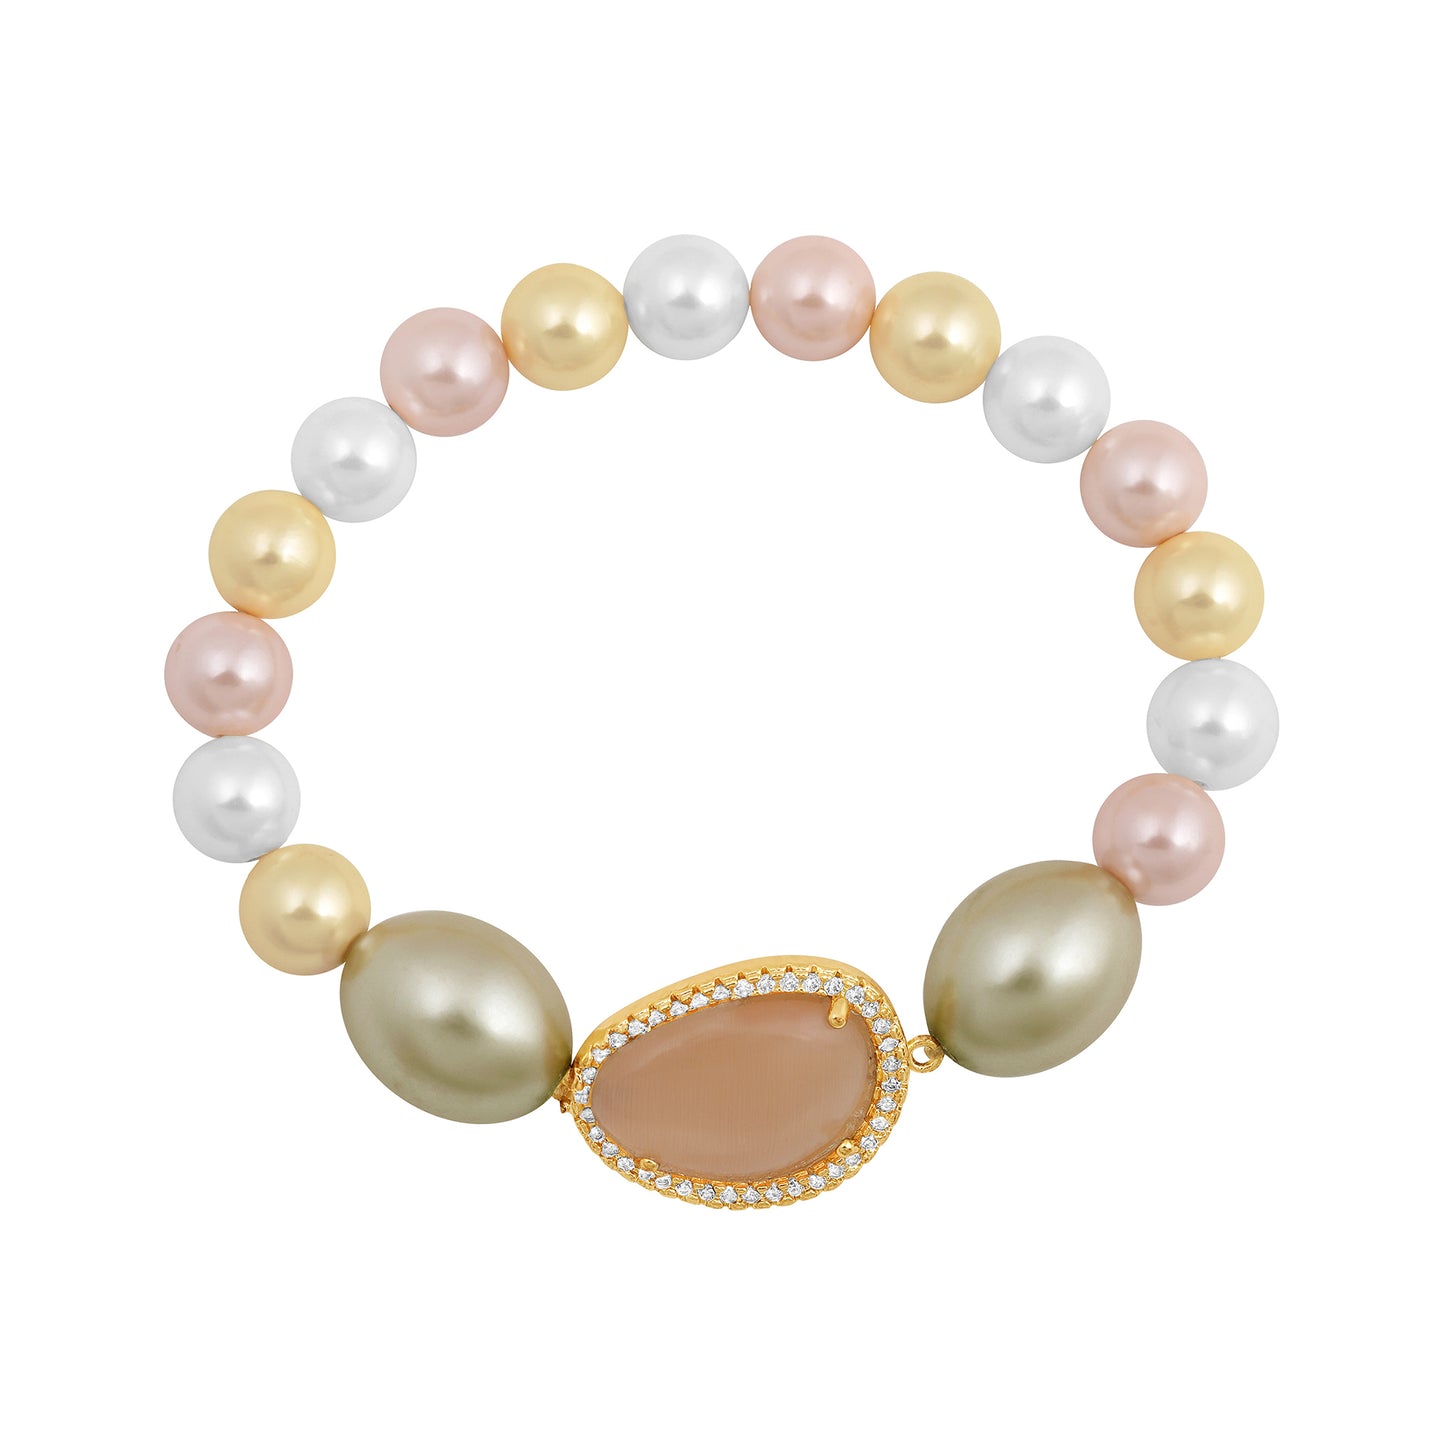 Bdiva Shell Pearl Bracelet with Coral Stone.